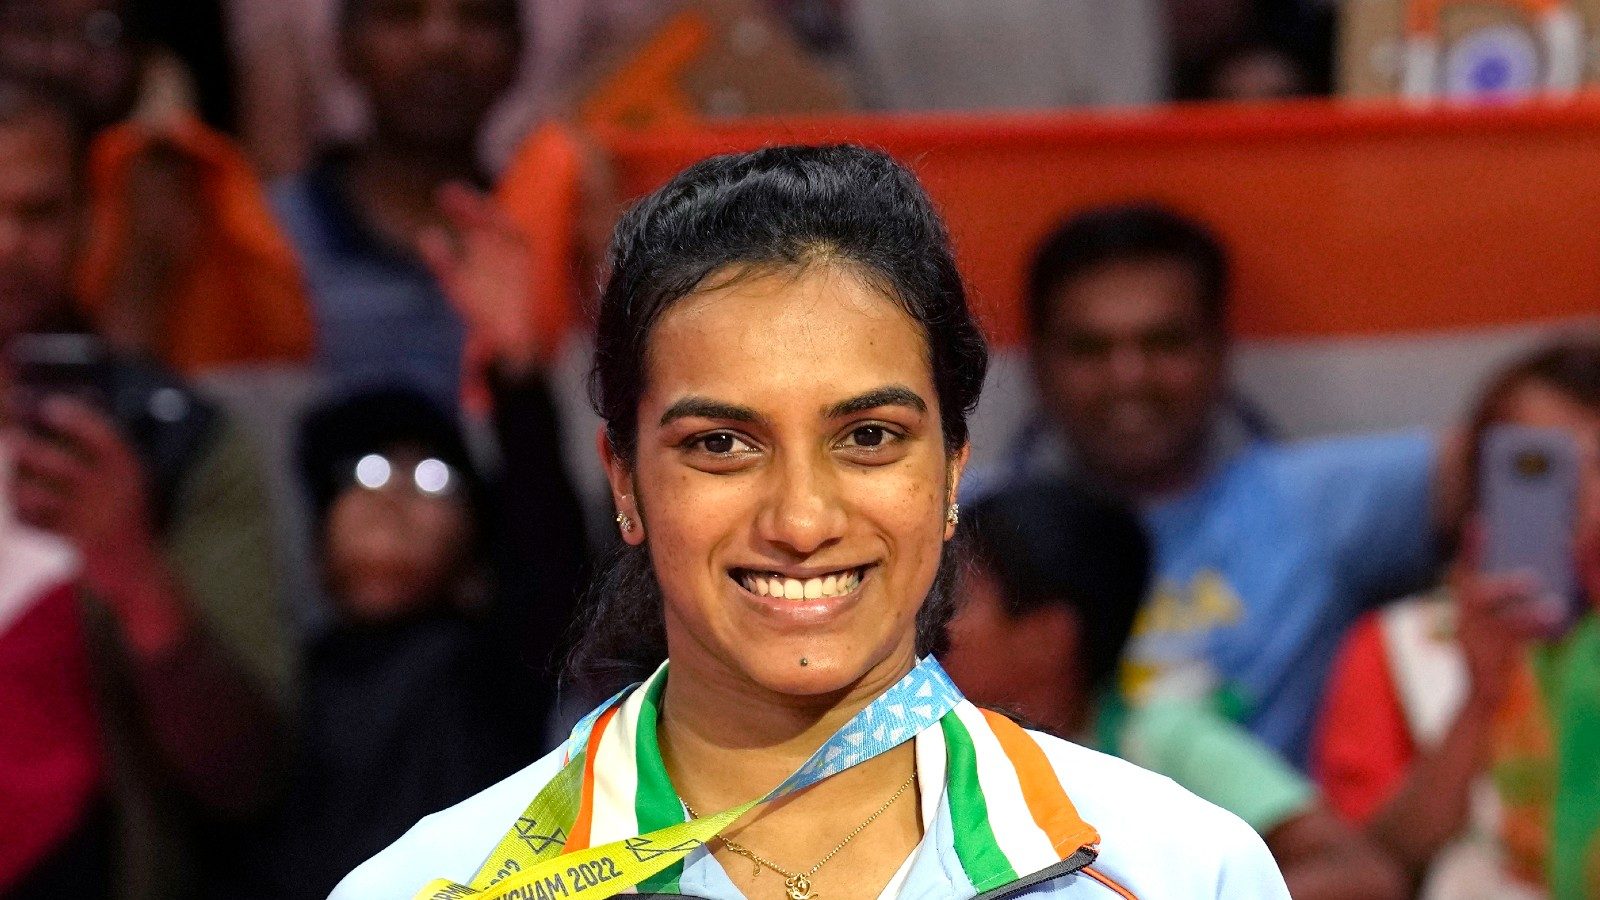 CWG 2022 Day 11 India Results in Photos Individual Golds for PV Sindhu, Lakshya Sen, Sharath Kamal